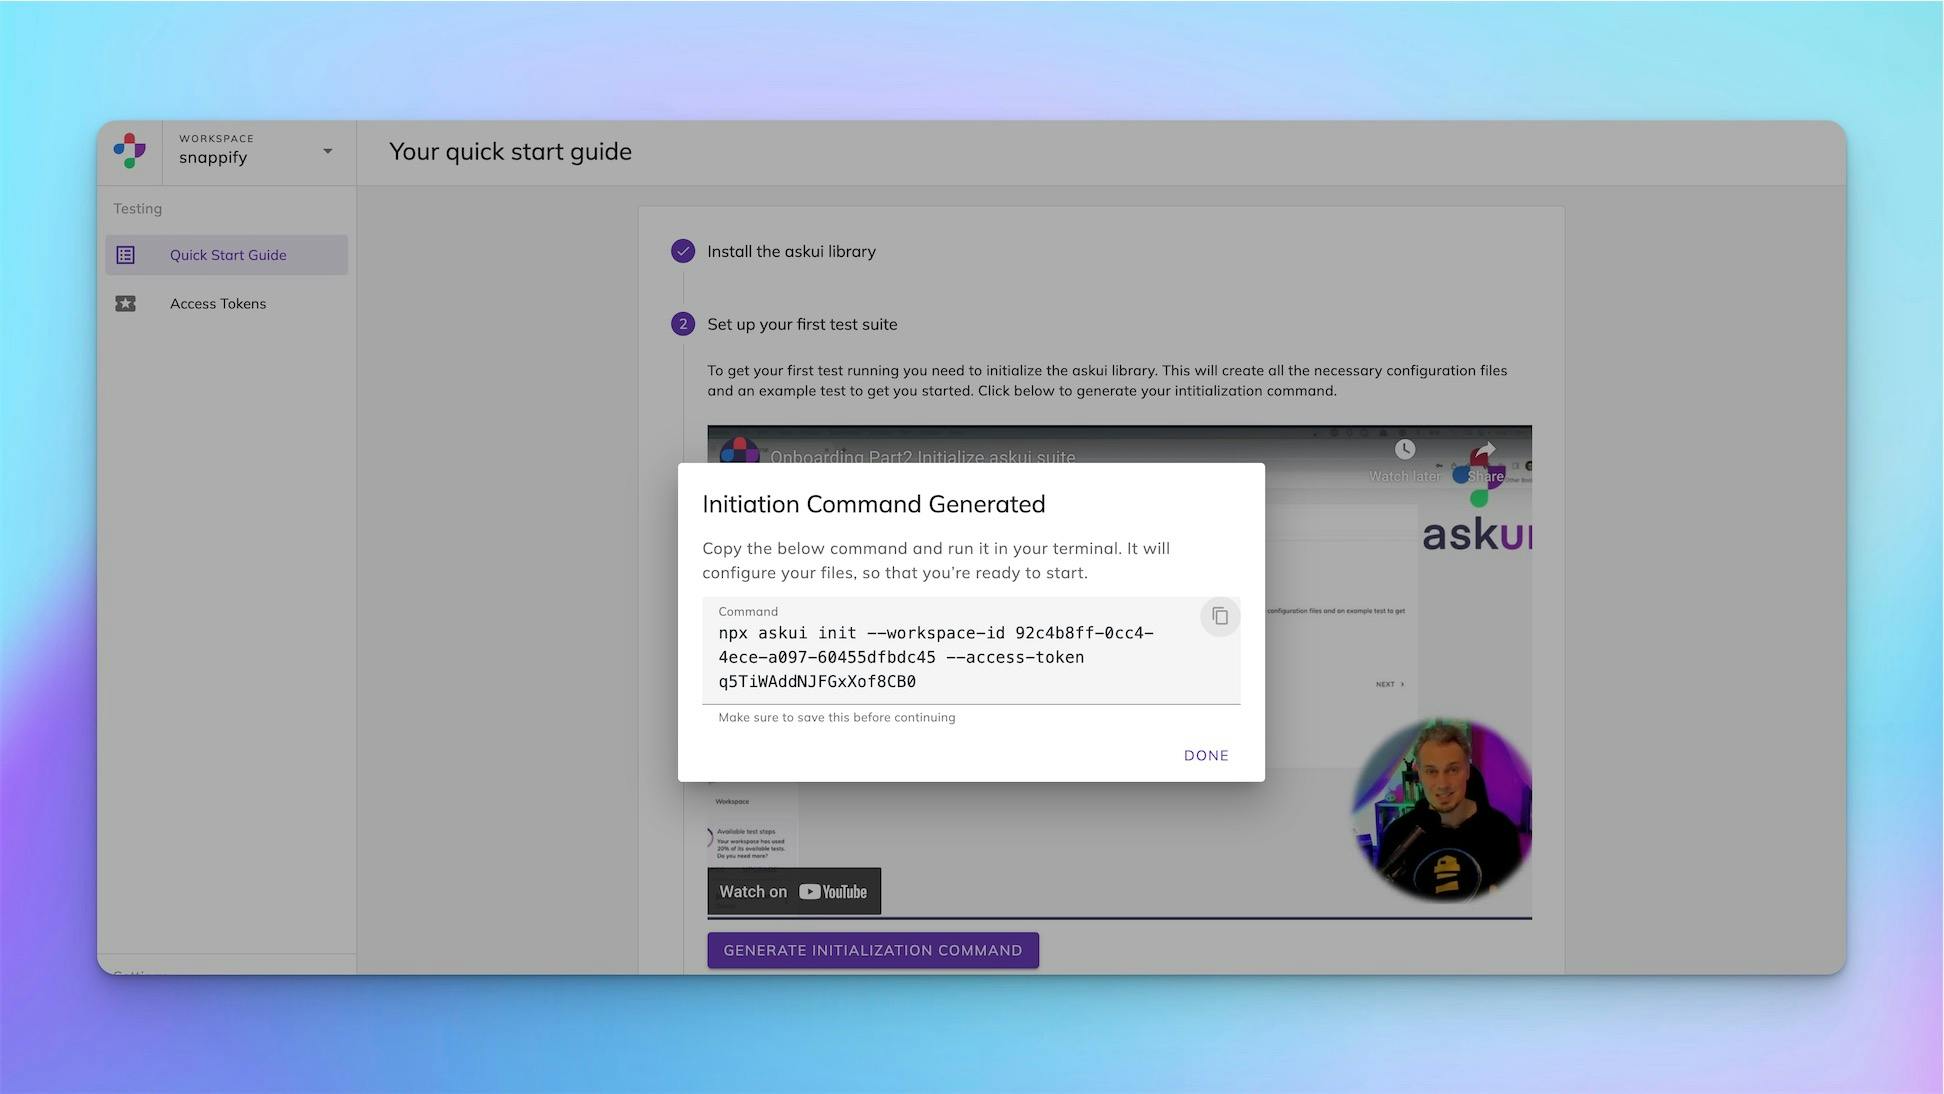 Screenshot showing the modal where you can access your credentials for askui